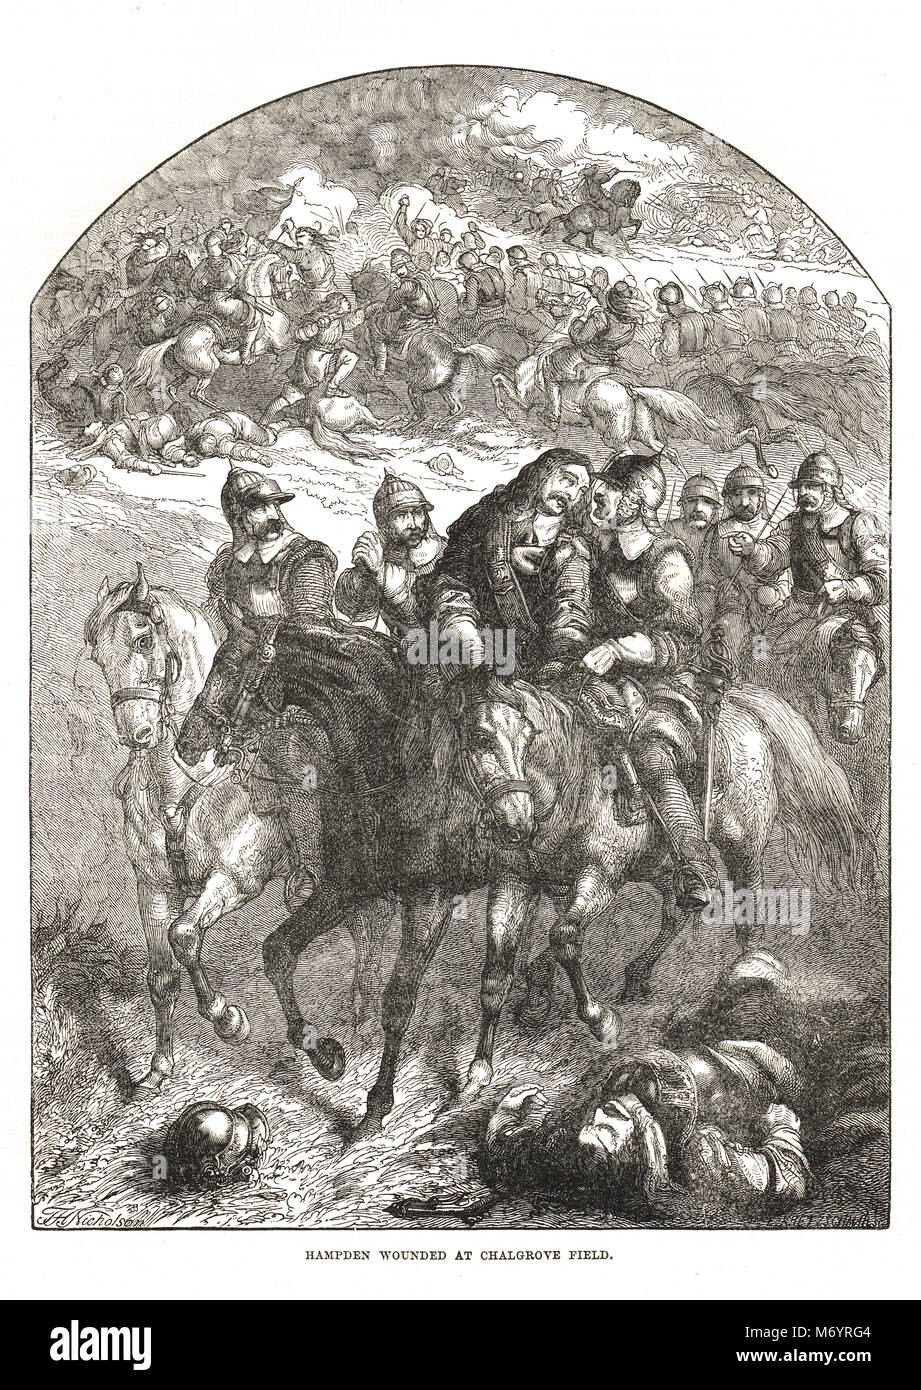 Parliamentarian John Hampden mortally wounded, The Battle of Chalgrove Field, 18 June 1643 Stock Photo